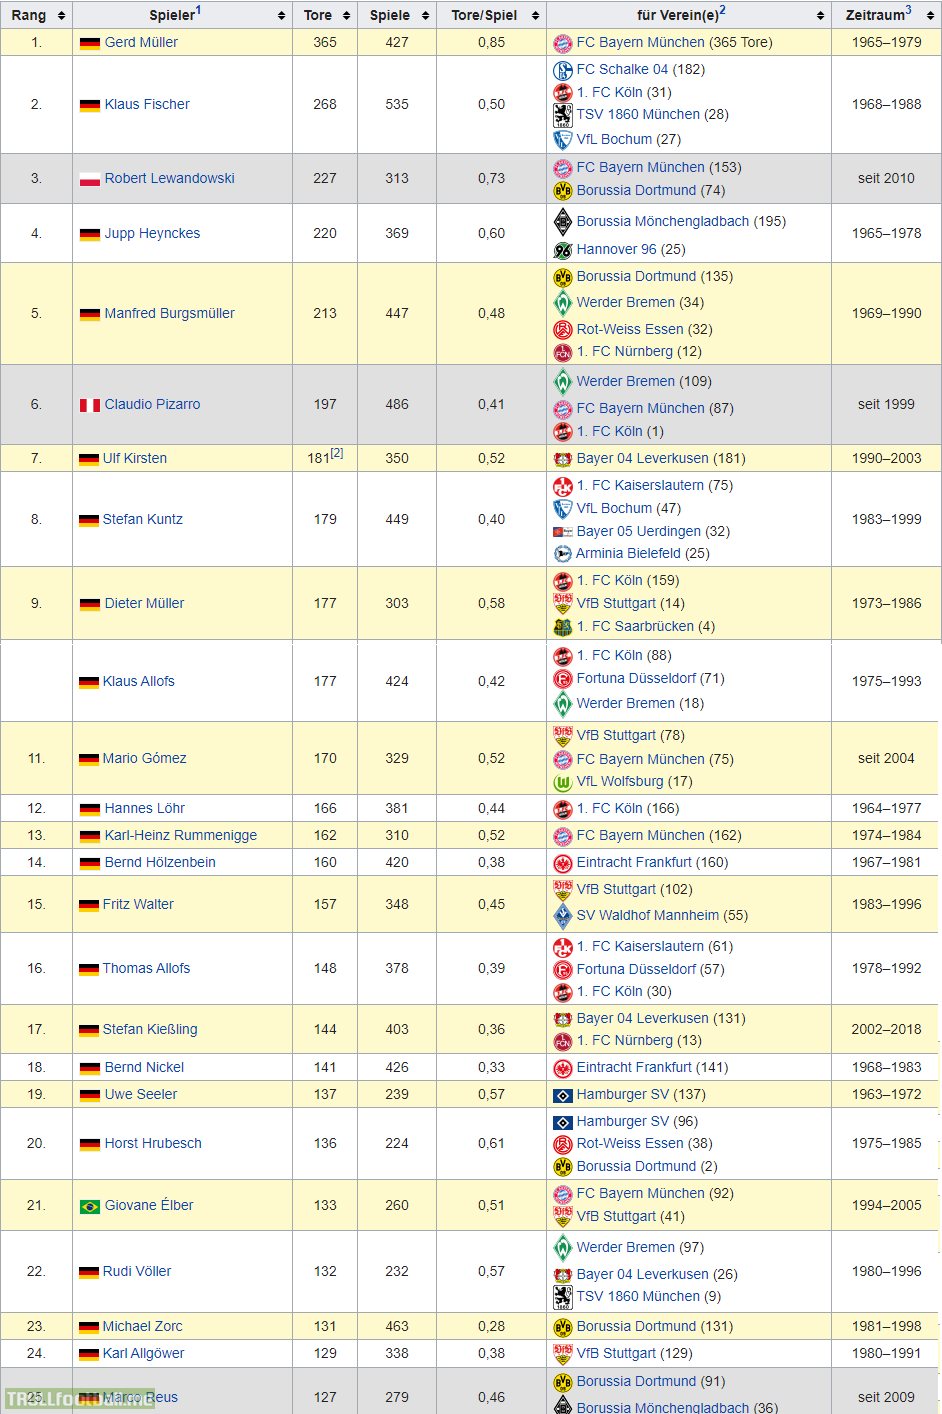 Bundesliga players with the most goals and the clubs they played for